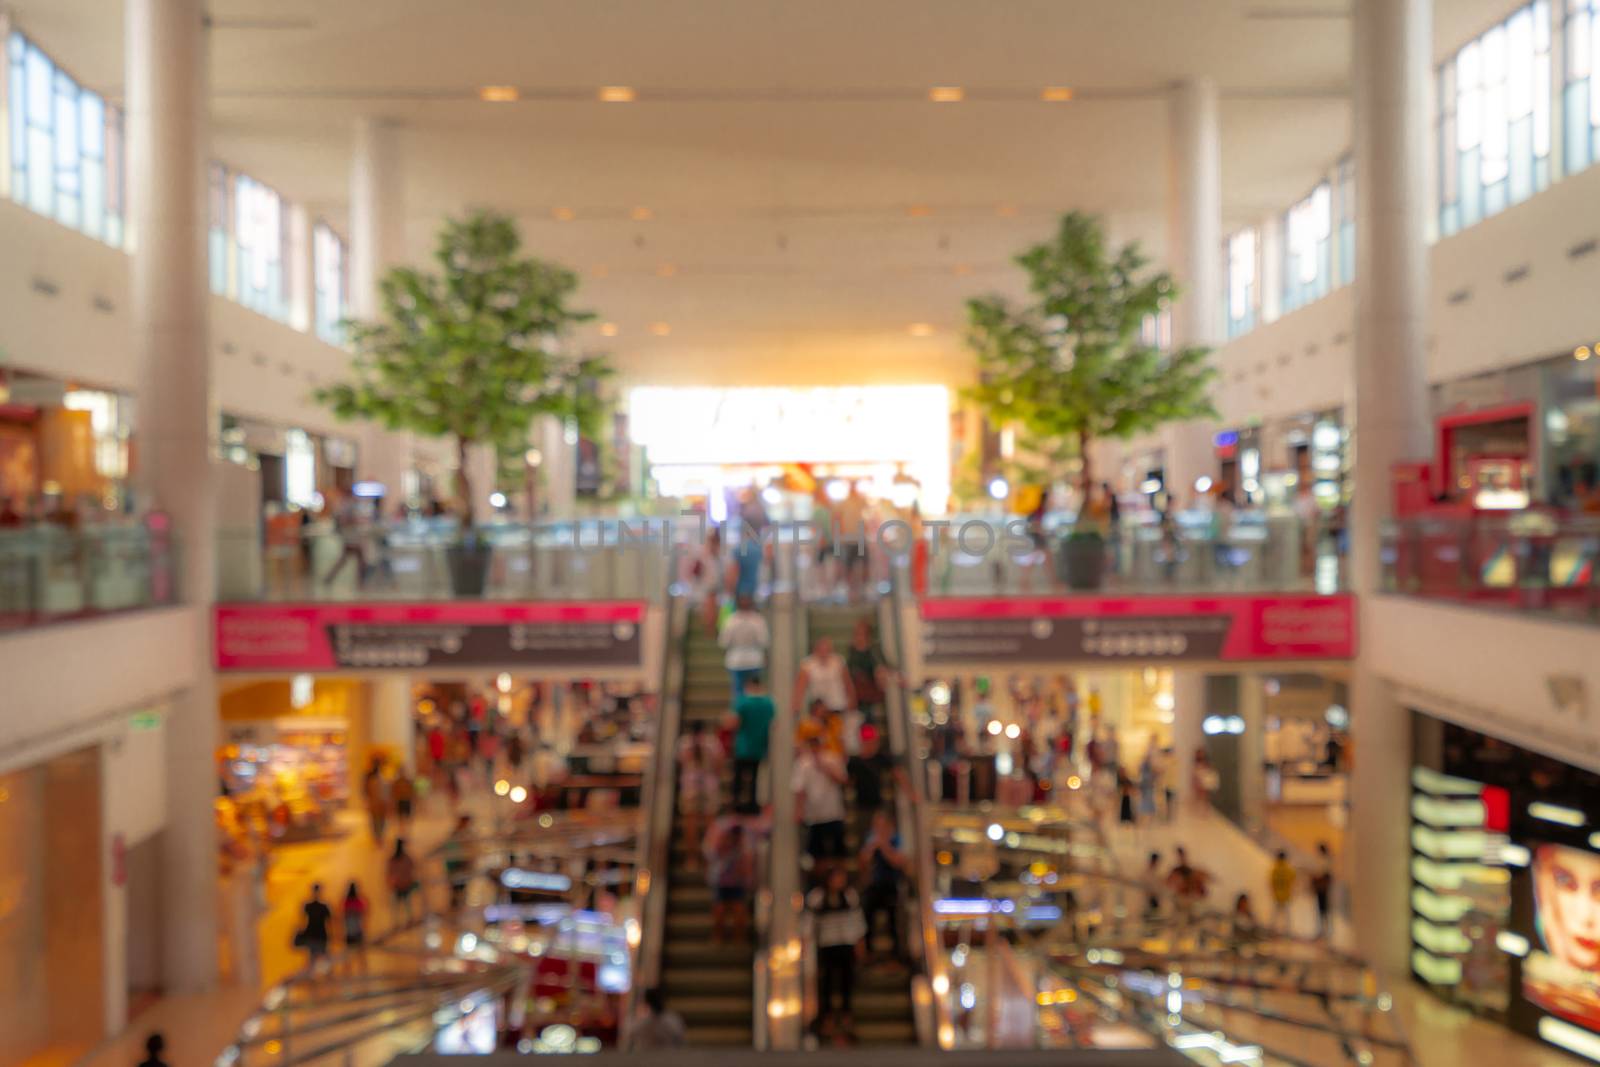 Blurred shopping mall background. People walking and shopping on holiday. People in escalators at the modern shopping mall that second floor decorated with two trees for fresh environment.